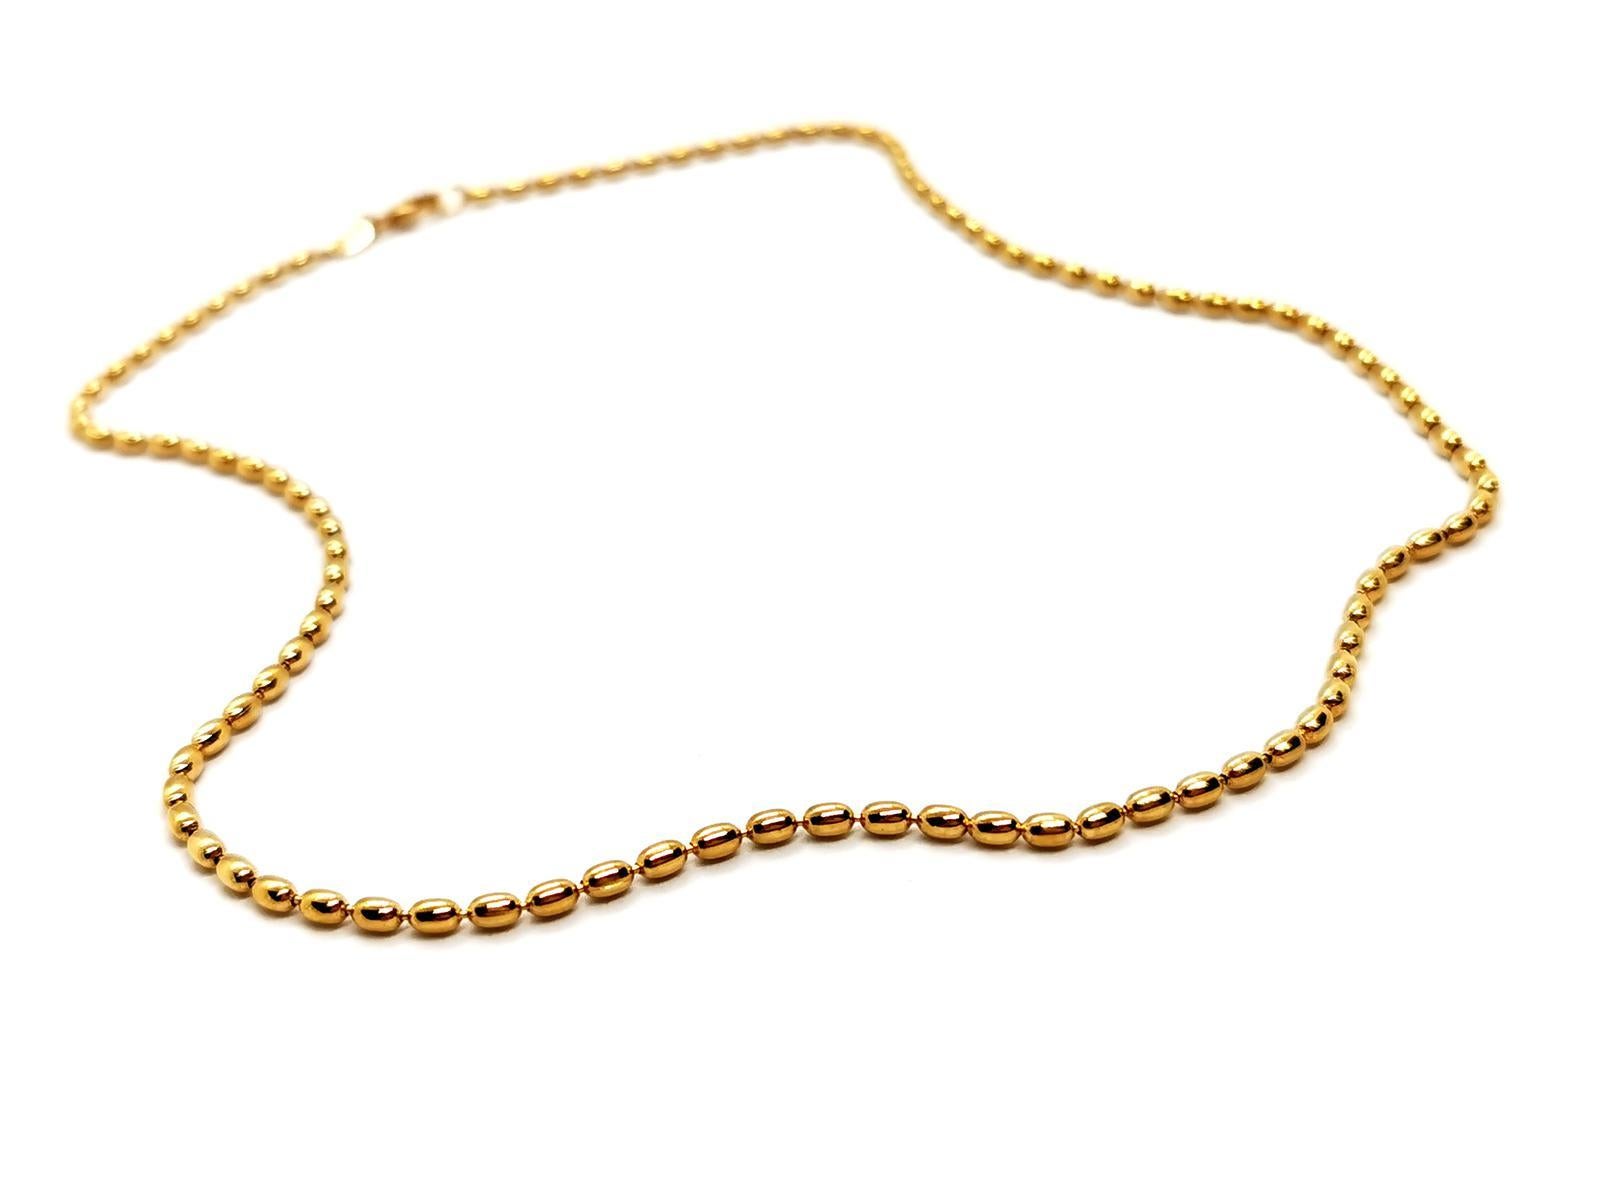 Necklace signed by Maison Fred. in 750 thousandths yellow gold (18 carats). olive link chain. length: 42 cm. width: 0.22 cm. dimensions of a link: 0.3 cm x 0.22 cm. weight total: 10.71 g. owl hallmark. excellent condition
